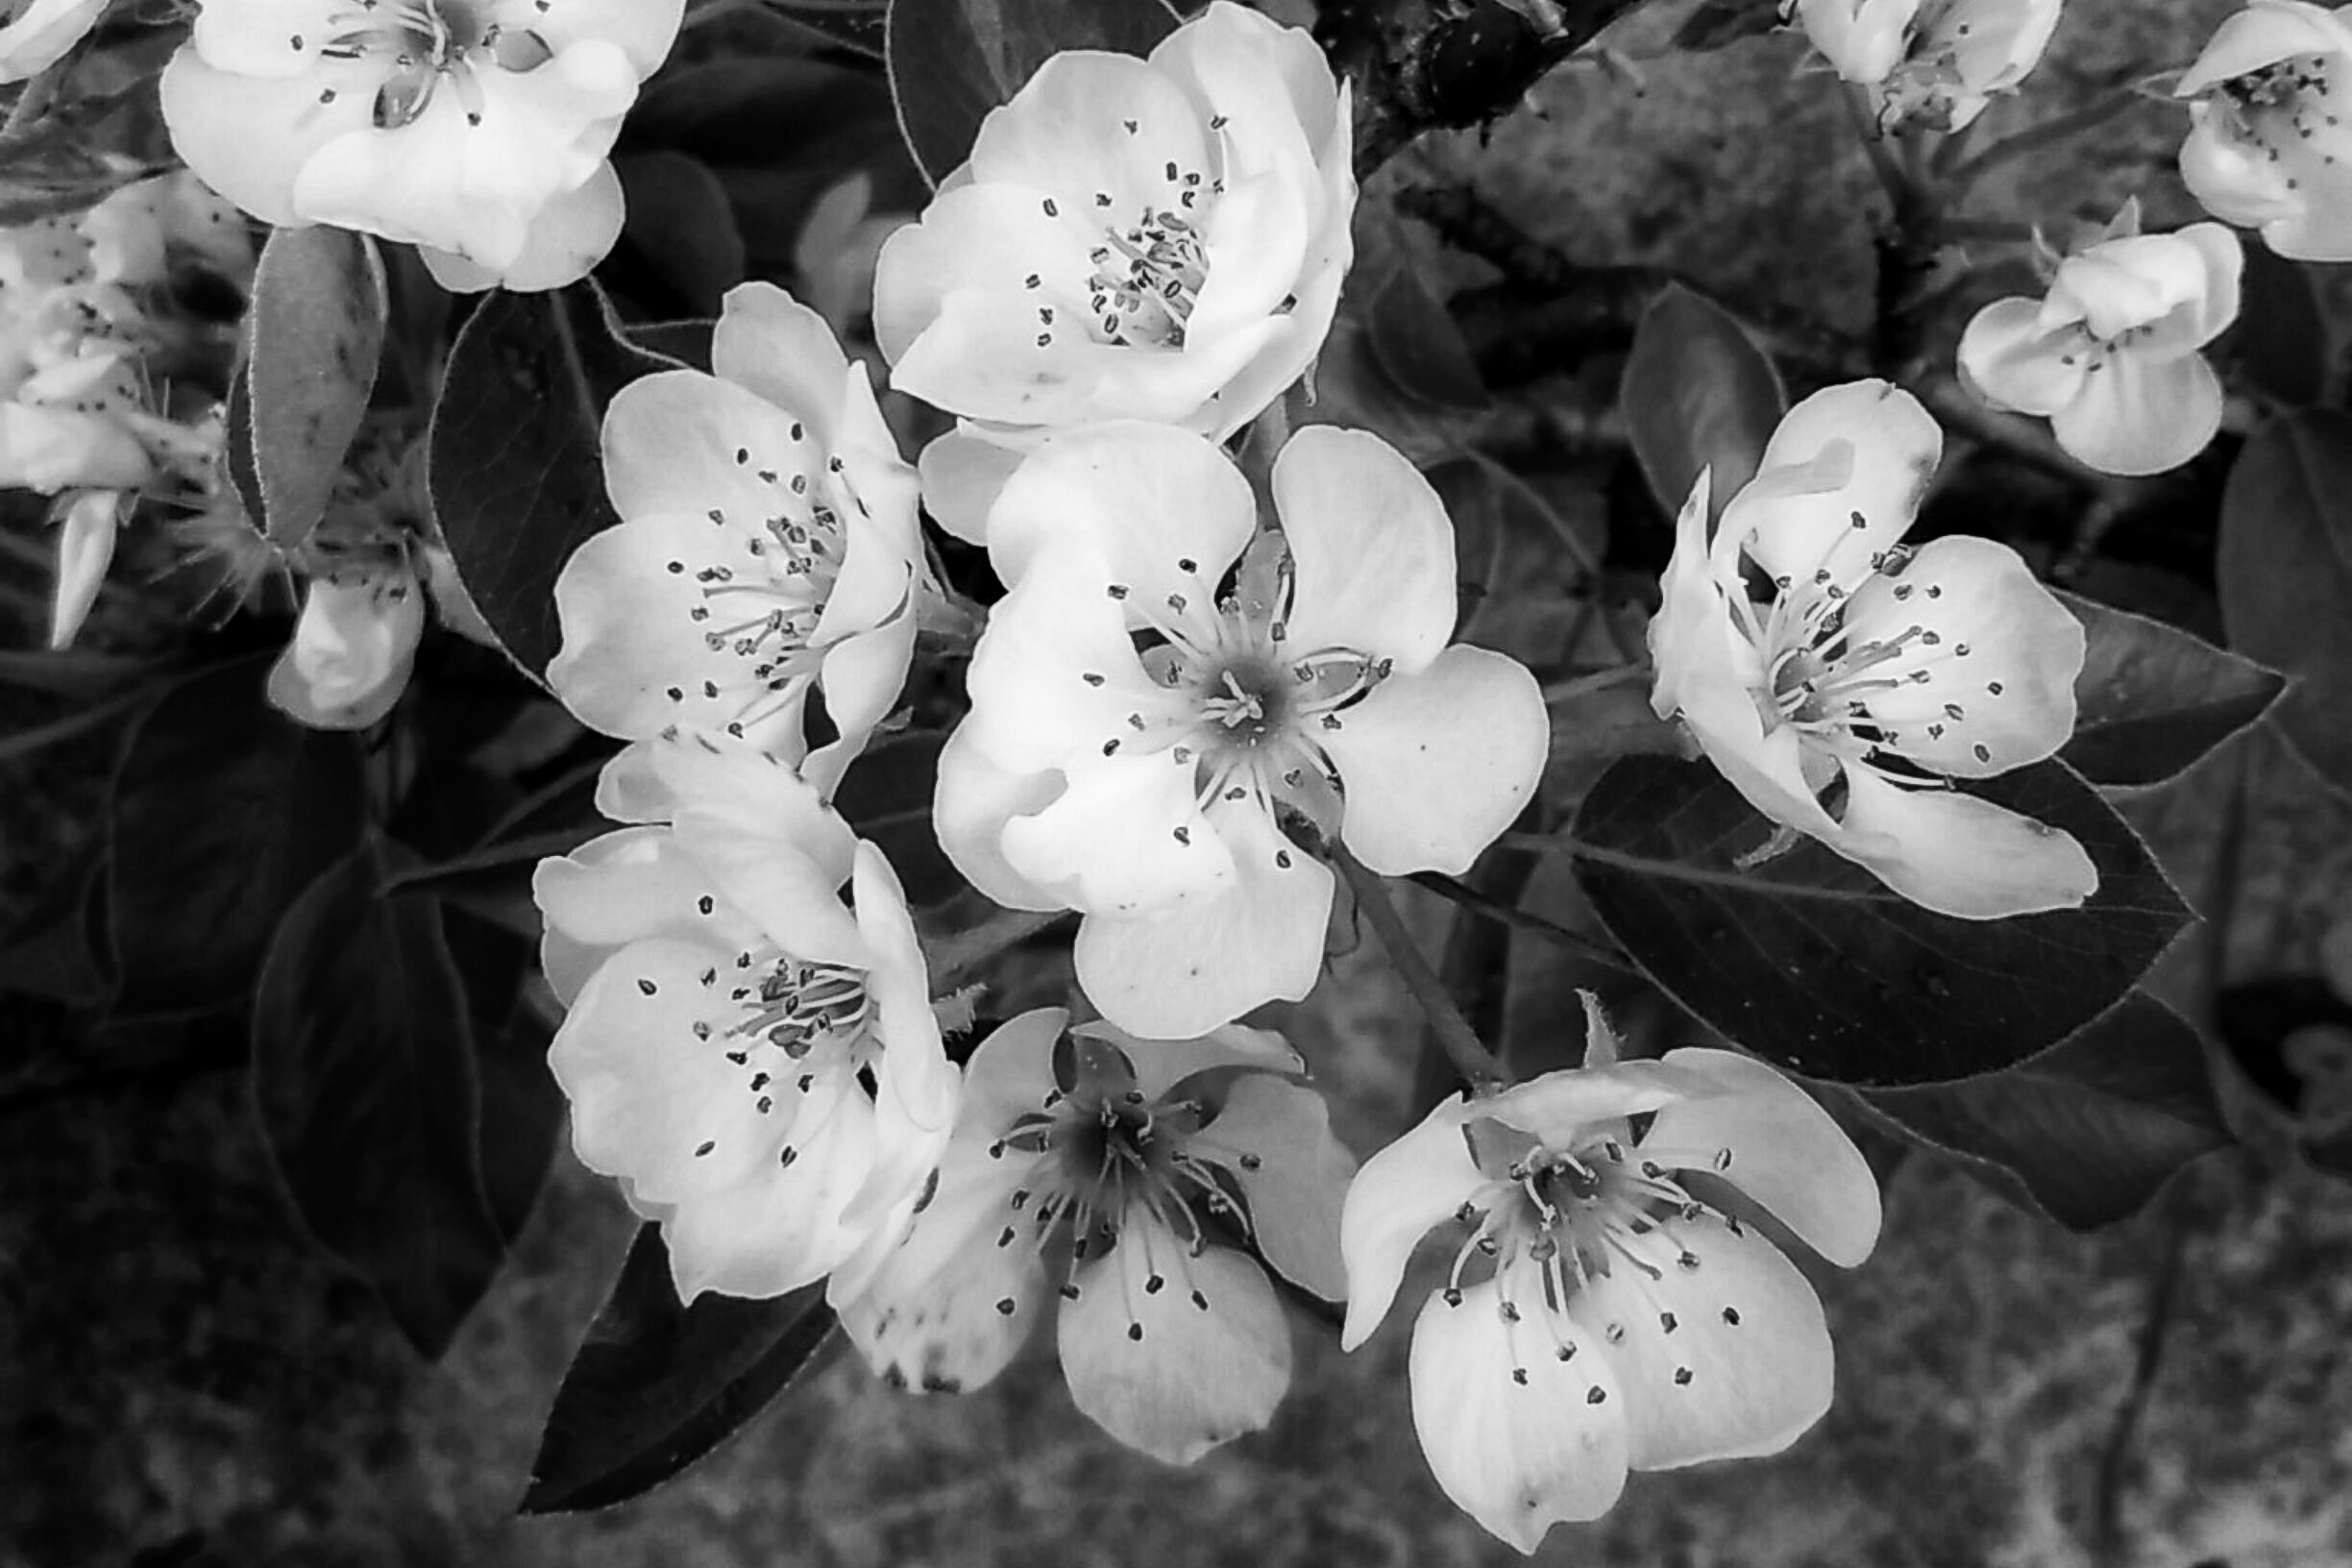 B&W Wednesday: Pear Blossoms